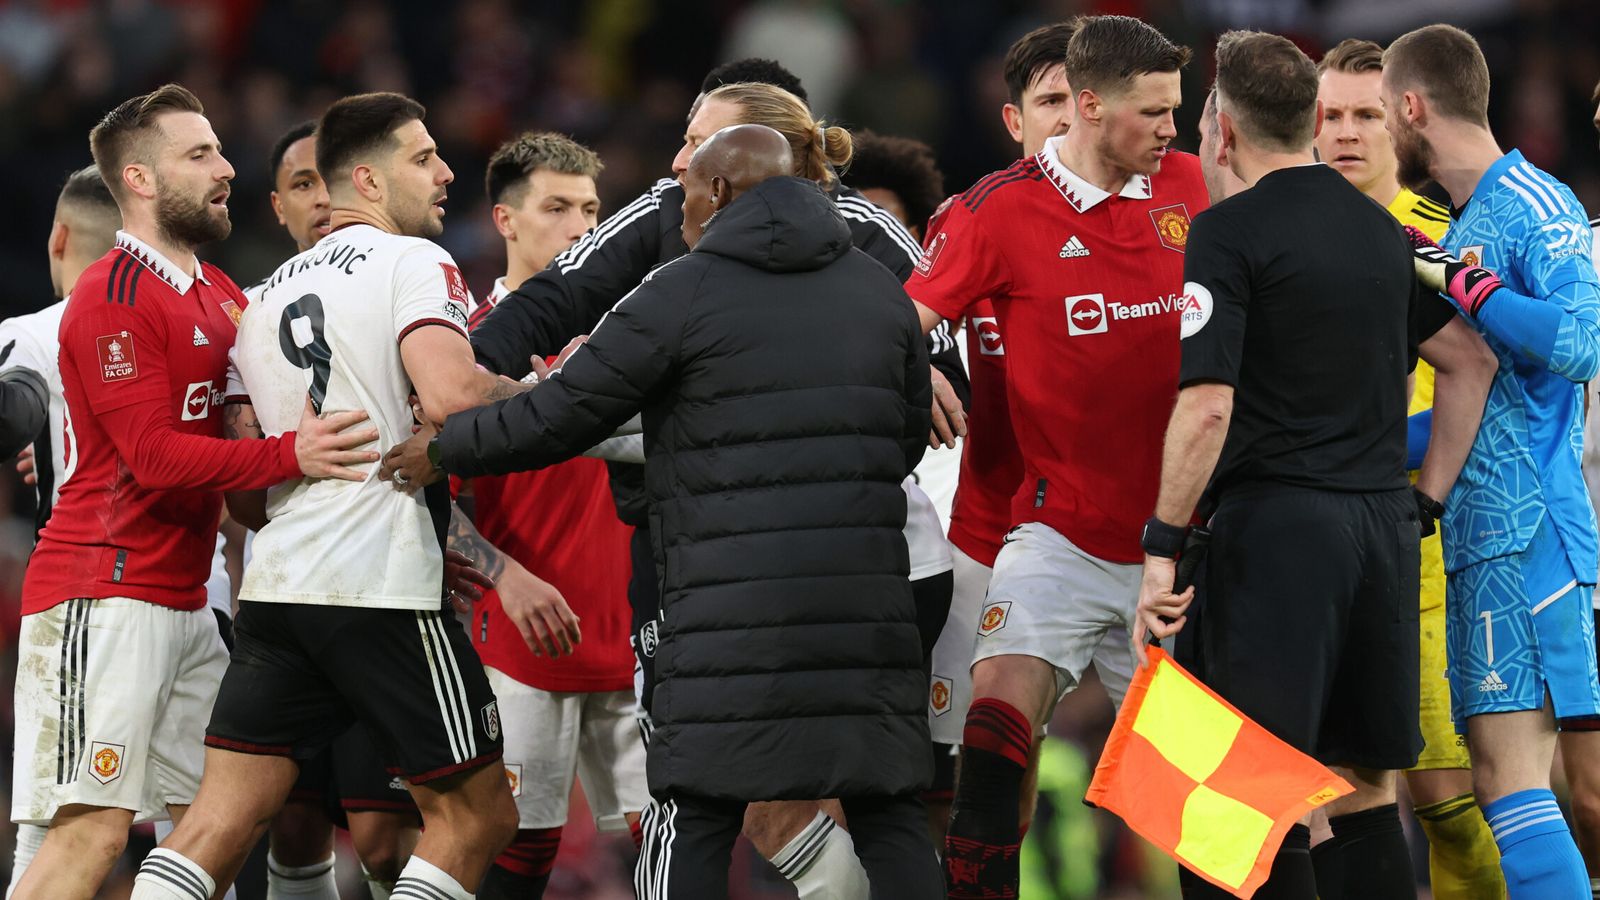 Chaotic FA Cup Match Leaves Manchester United In The Semi Final